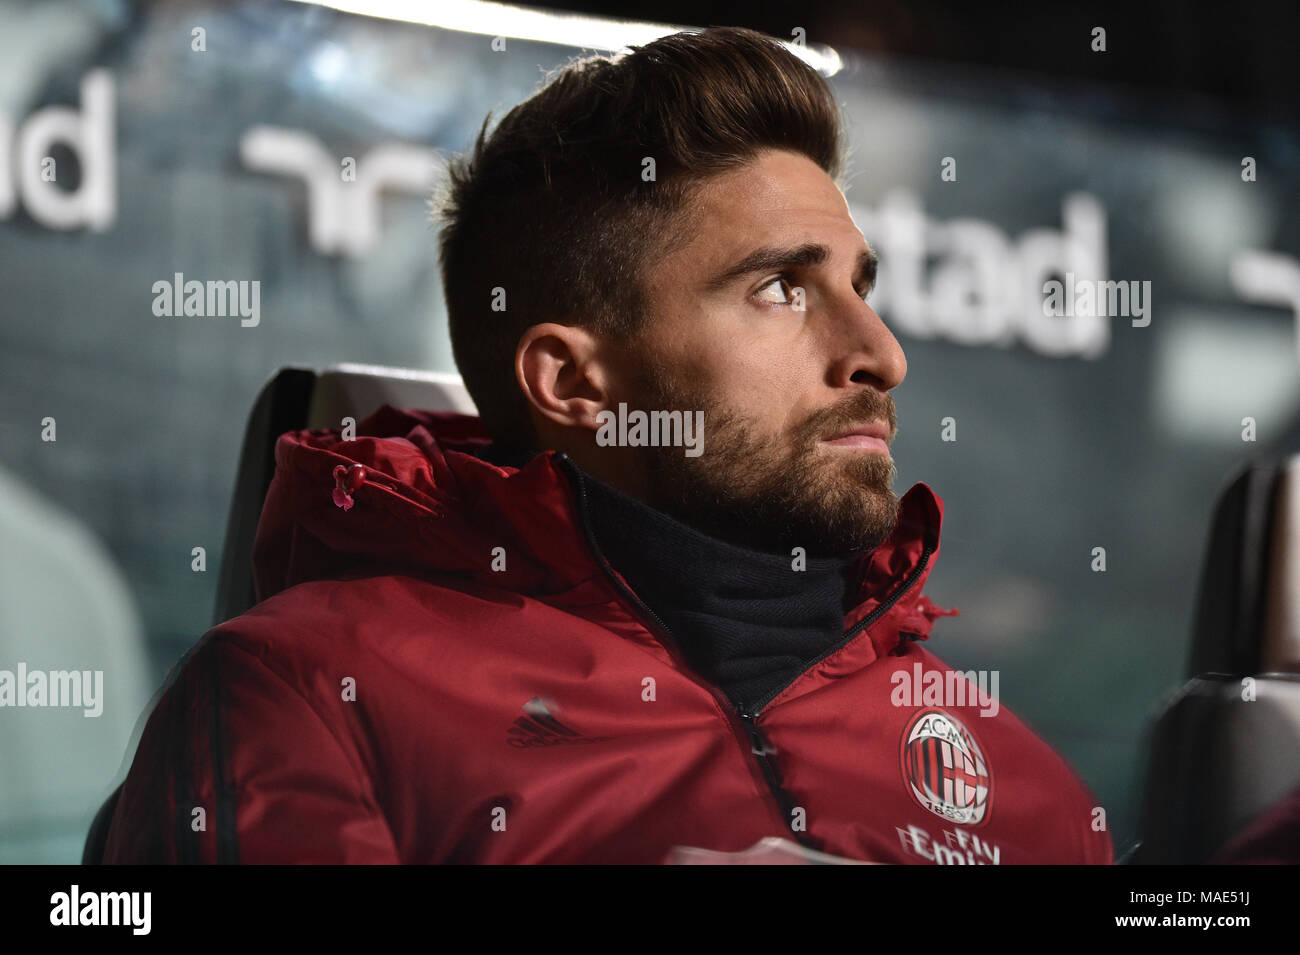 Milan's player during the Serie A football match between Juventus FC vs AC Milan at Allianz Stadium  on 31 March 2018 in Turin, Italy. Credit: Antonio Polia/Alamy Live News Stock Photo